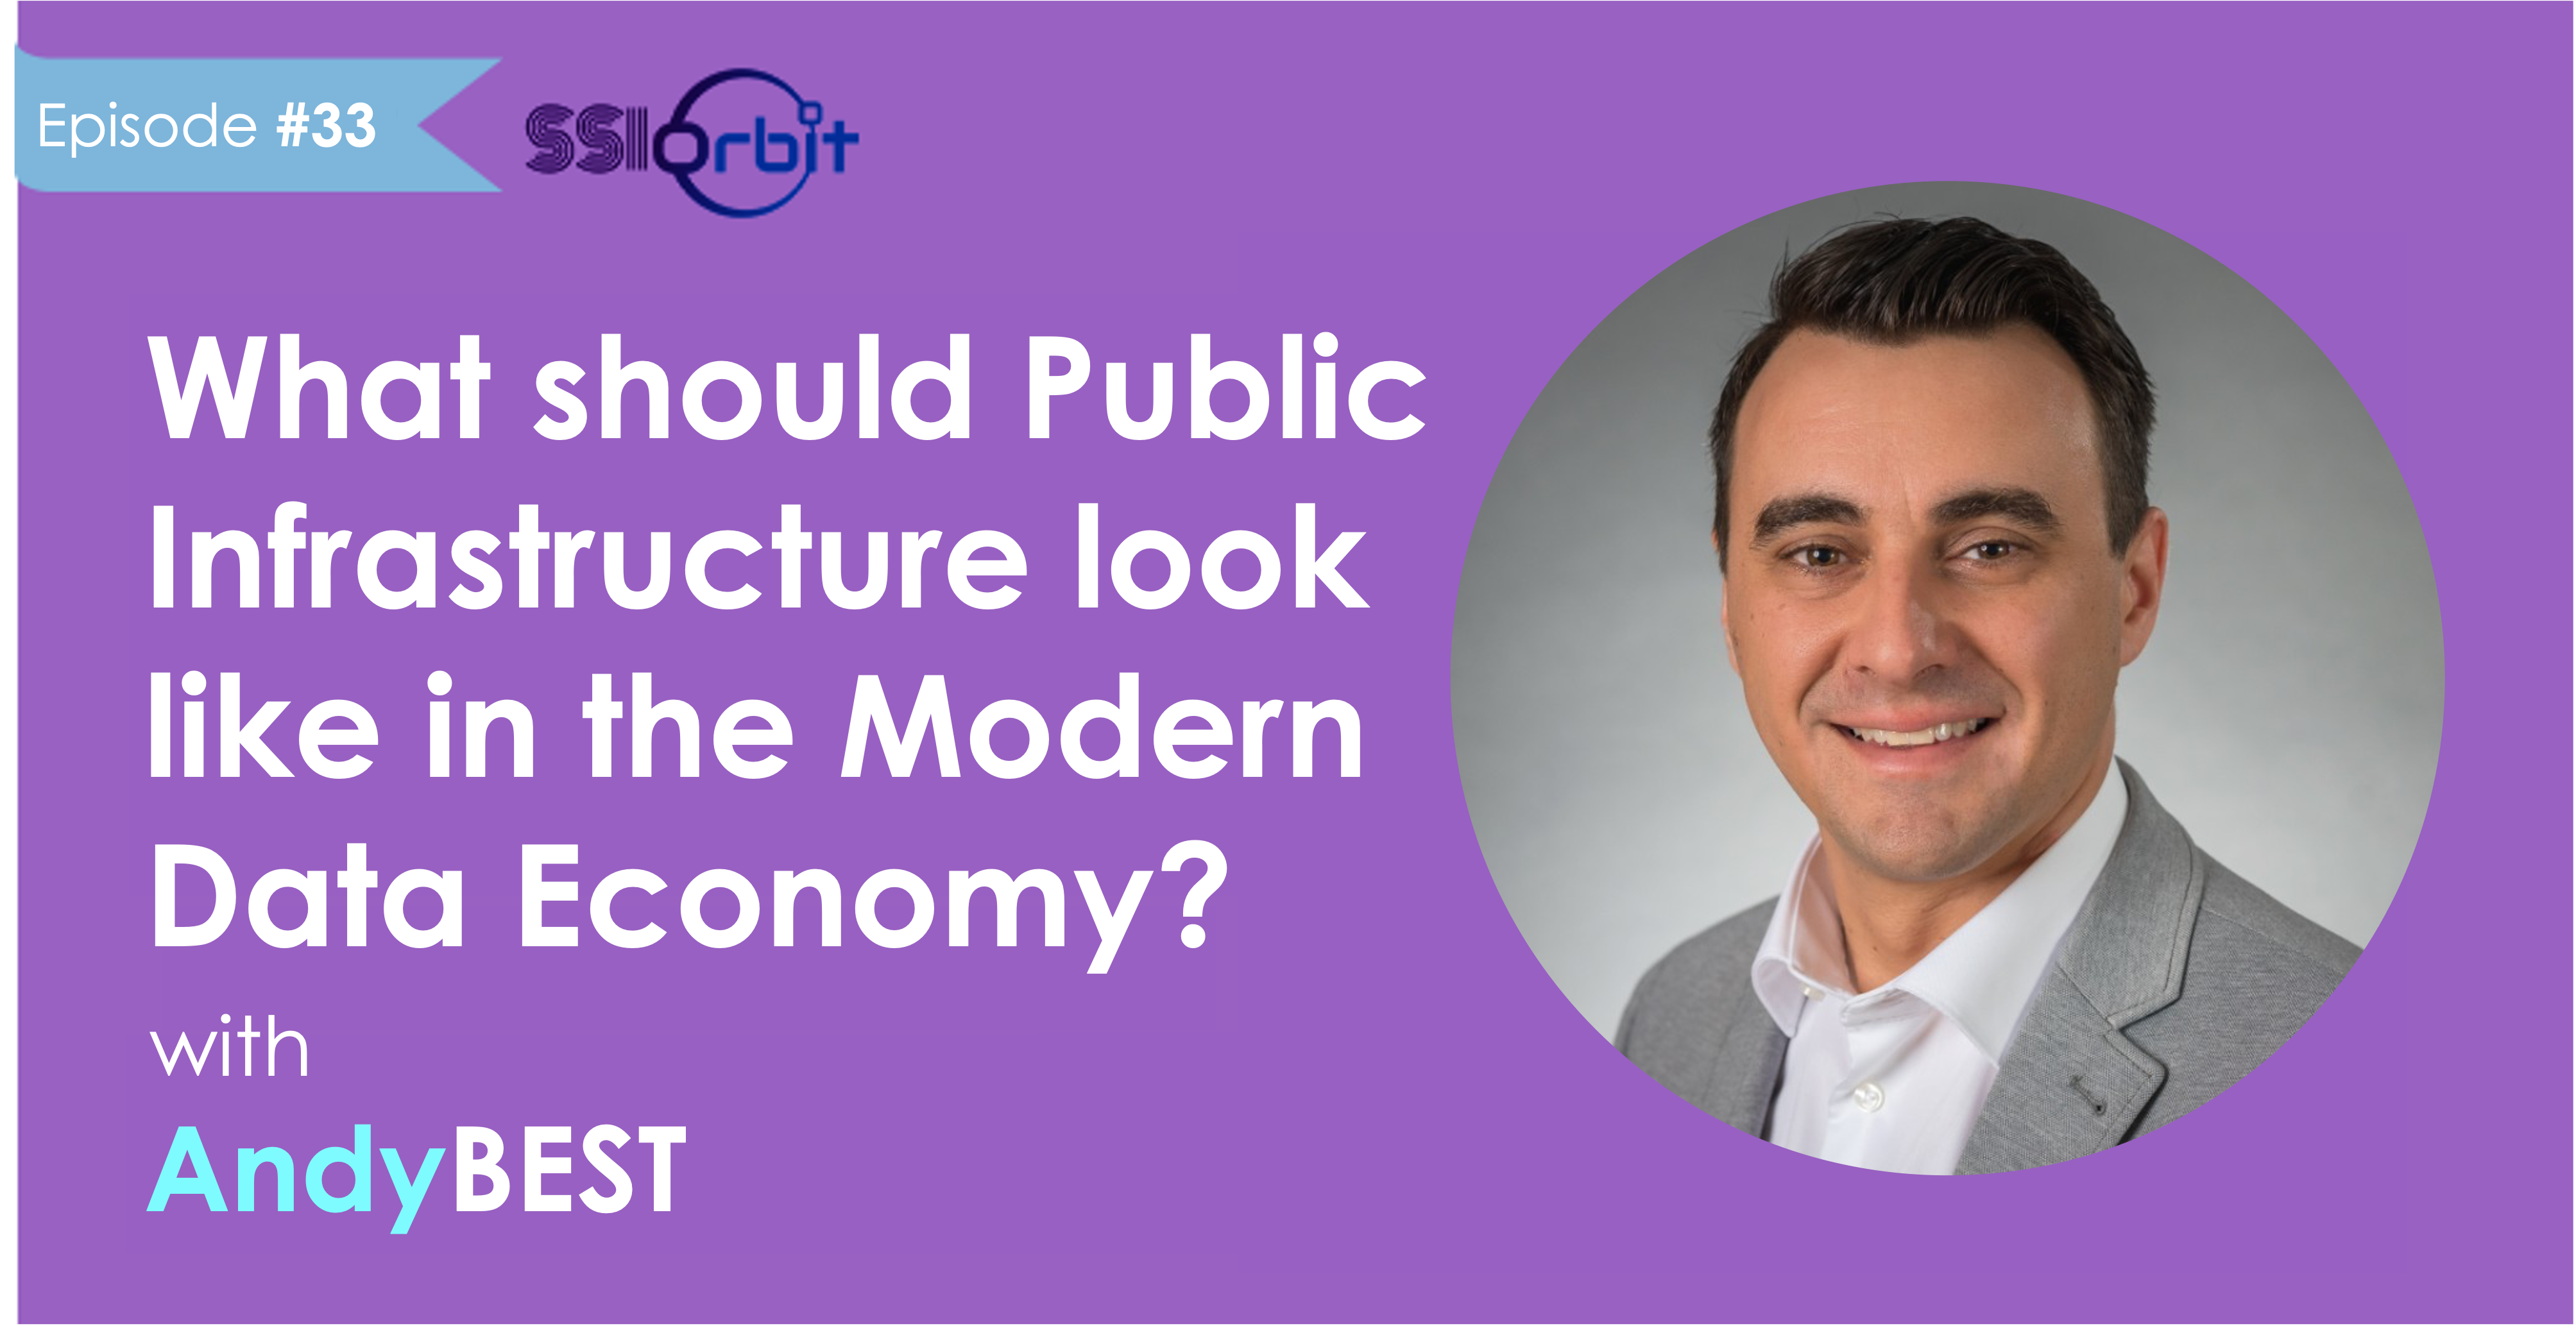 What should Public Infrastructure look like in the Modern Data Economy?  (with Andy Best)